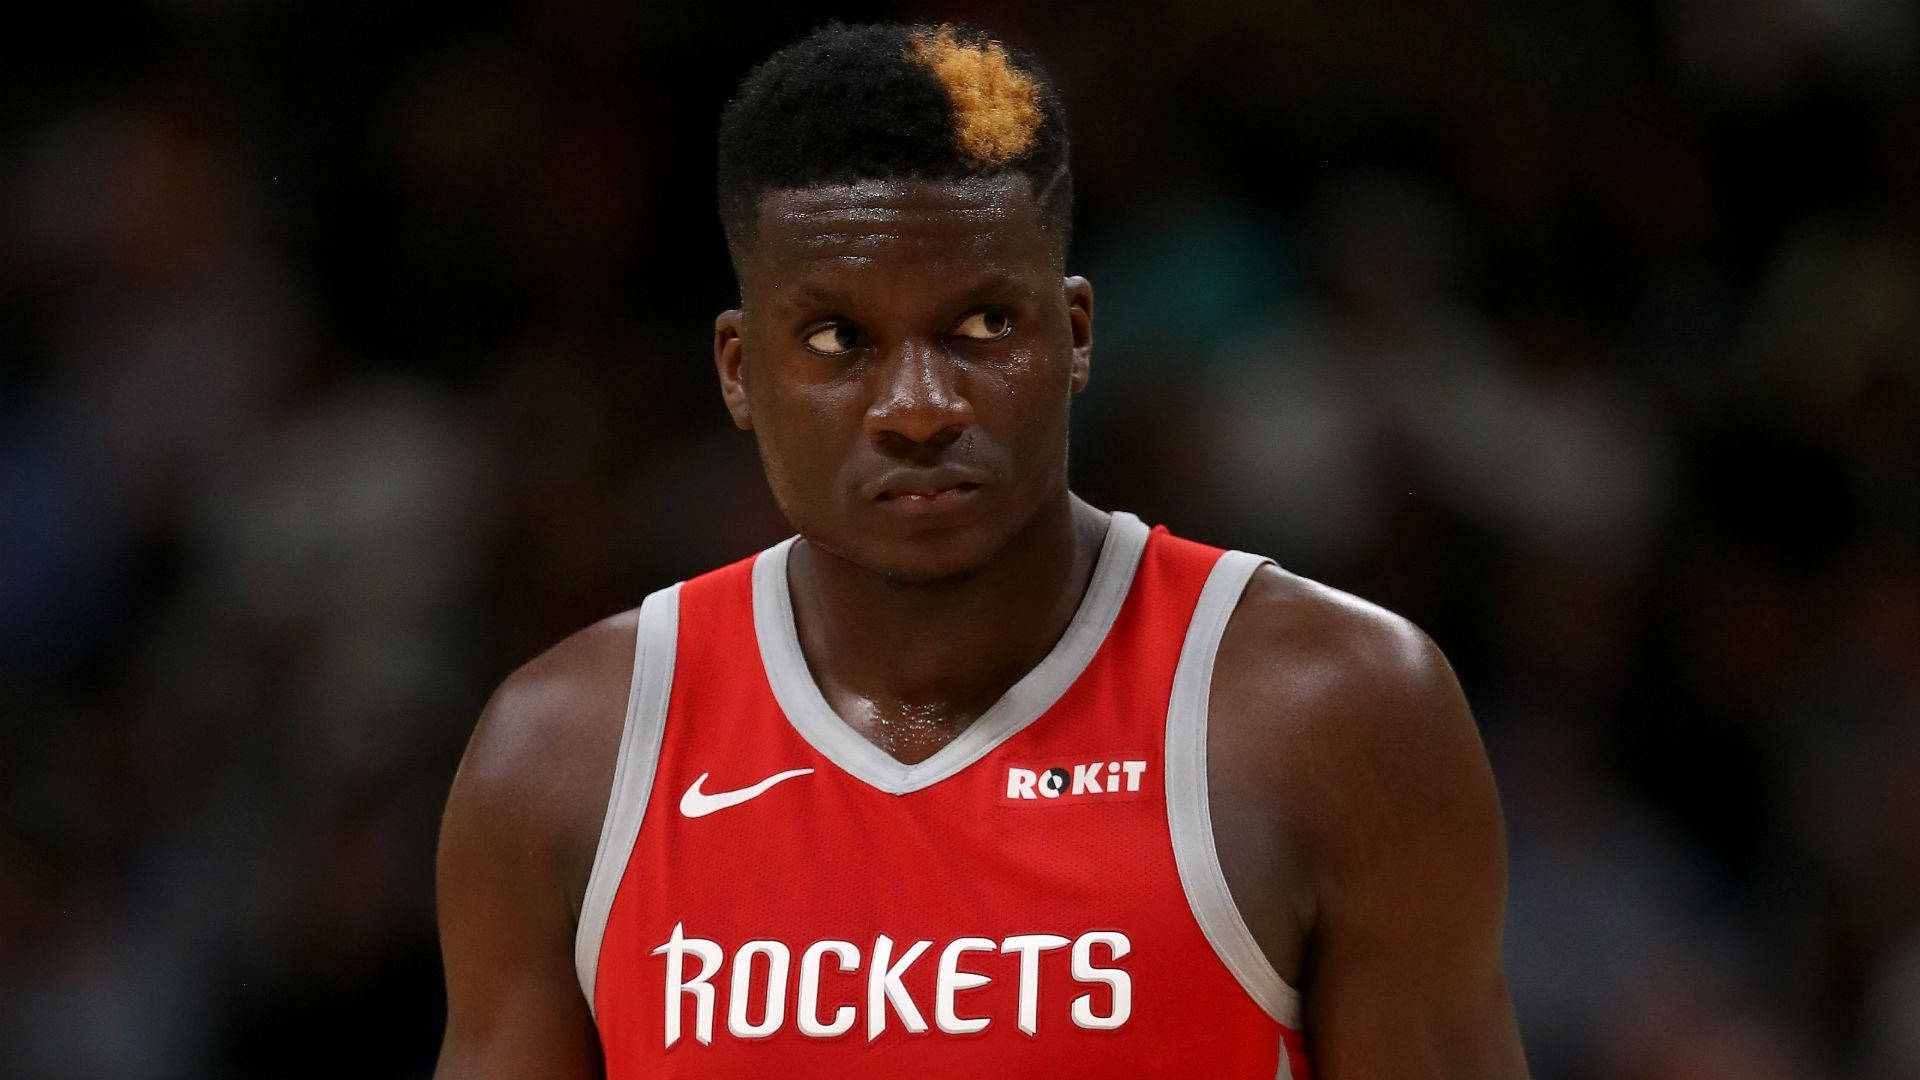 Nba Star Clint Capela Engaged In An Intense Game